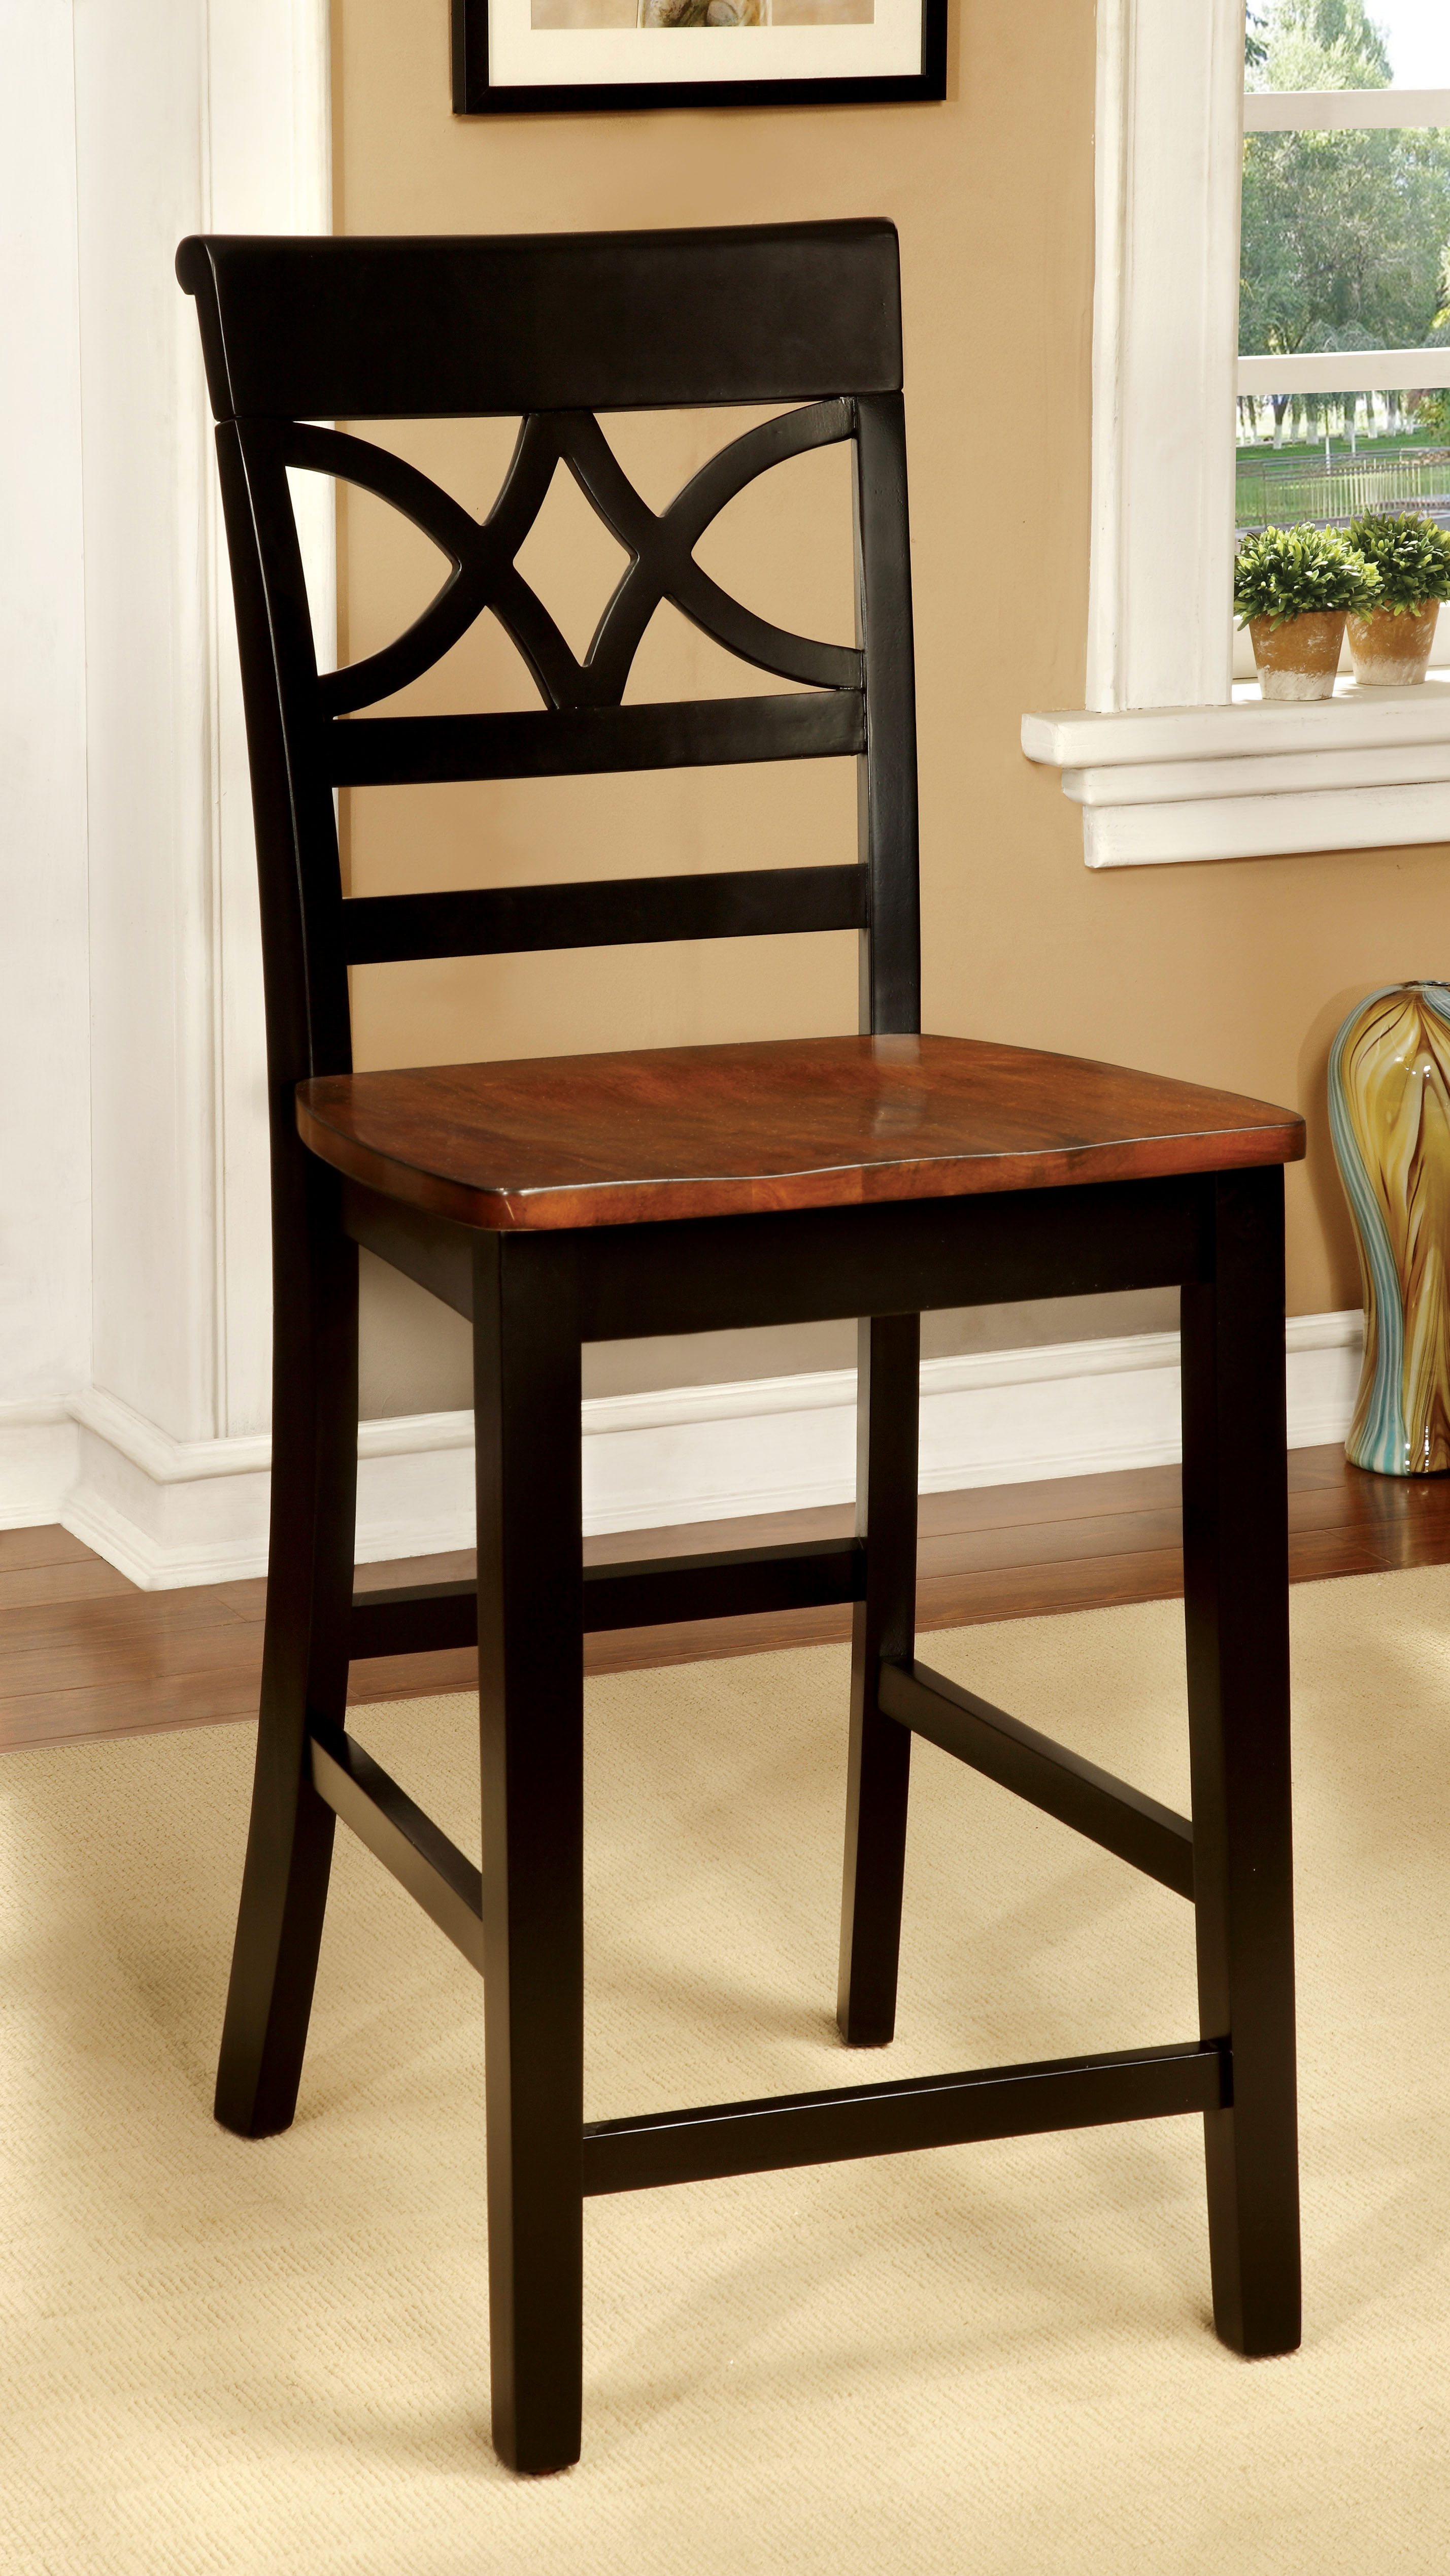 Furniture of America Leah Country Style 24.13-Inch Counter Height Chair (Set of 2)